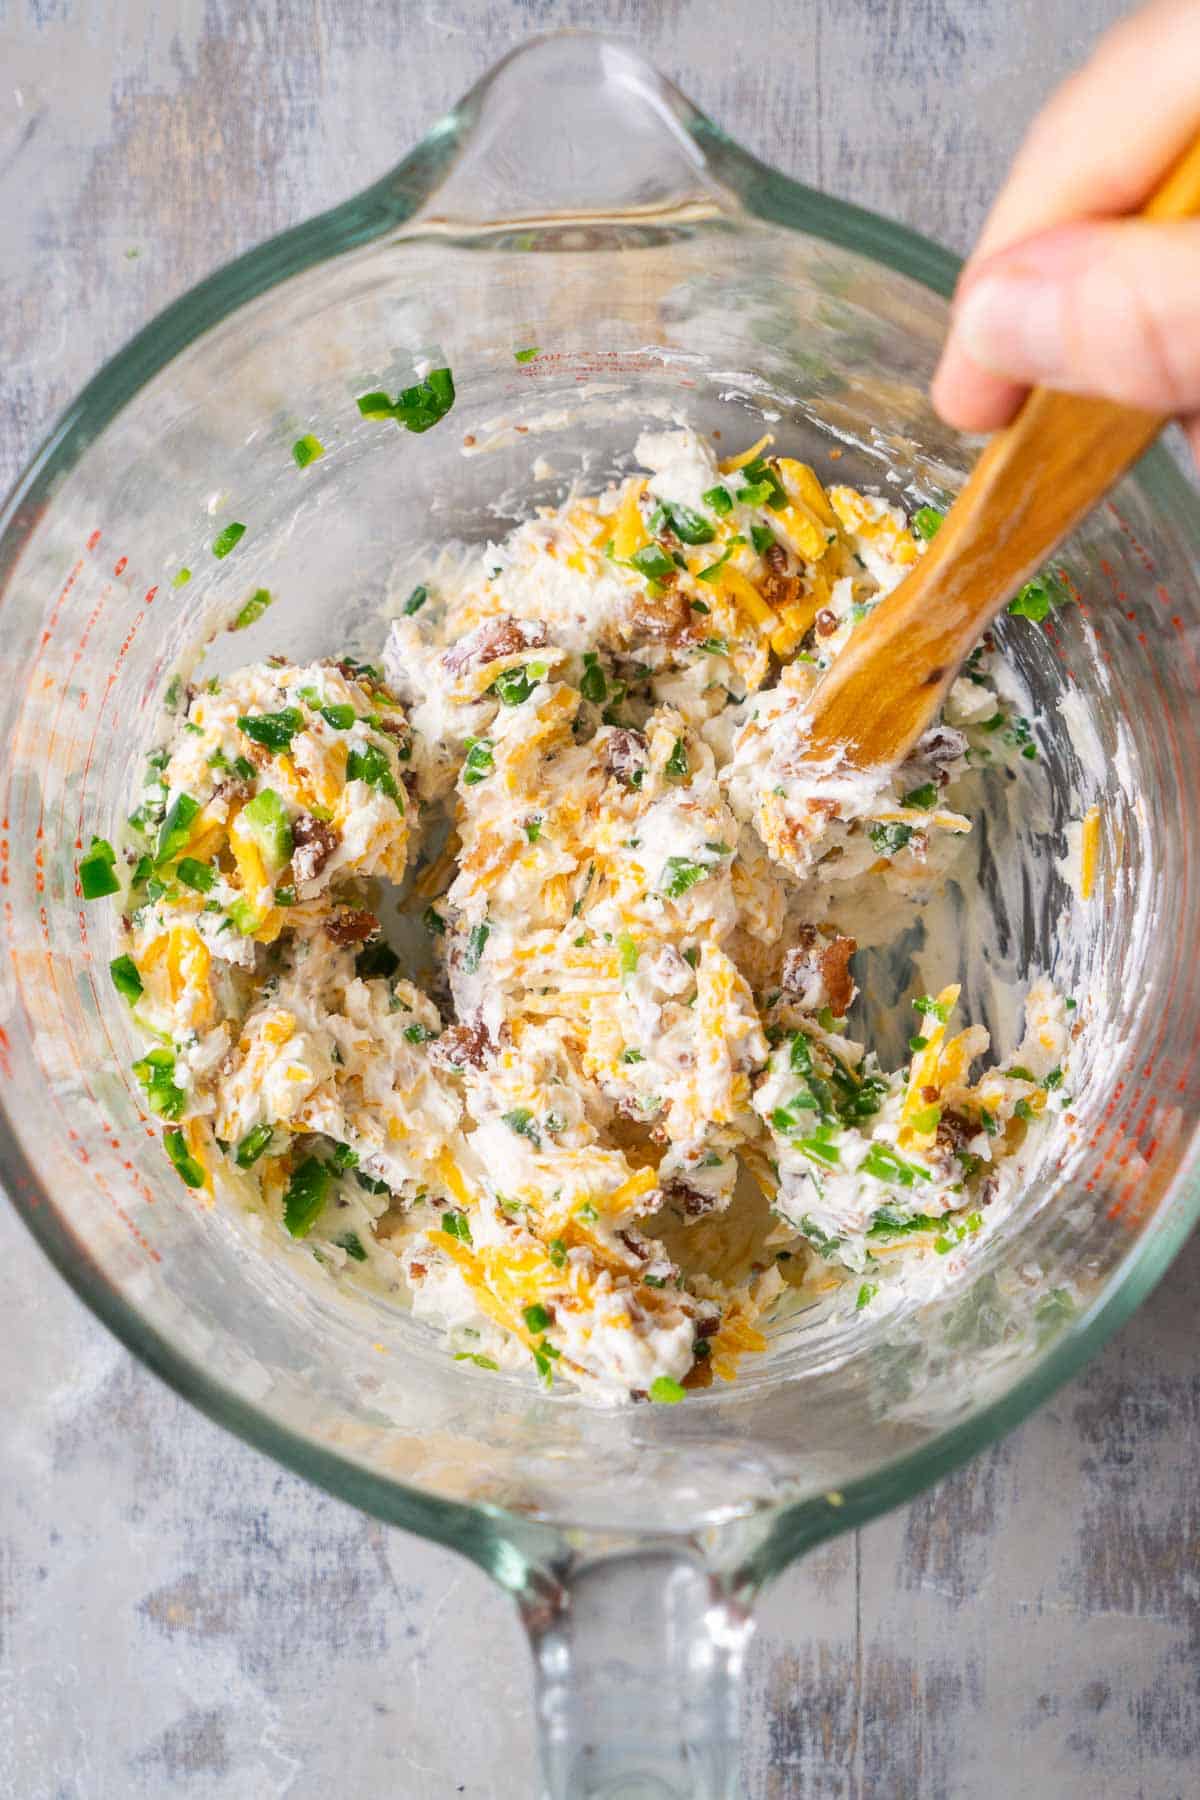 person's hand stirs jalapeno popper cheese ball ingredients together in glass mixing bowl